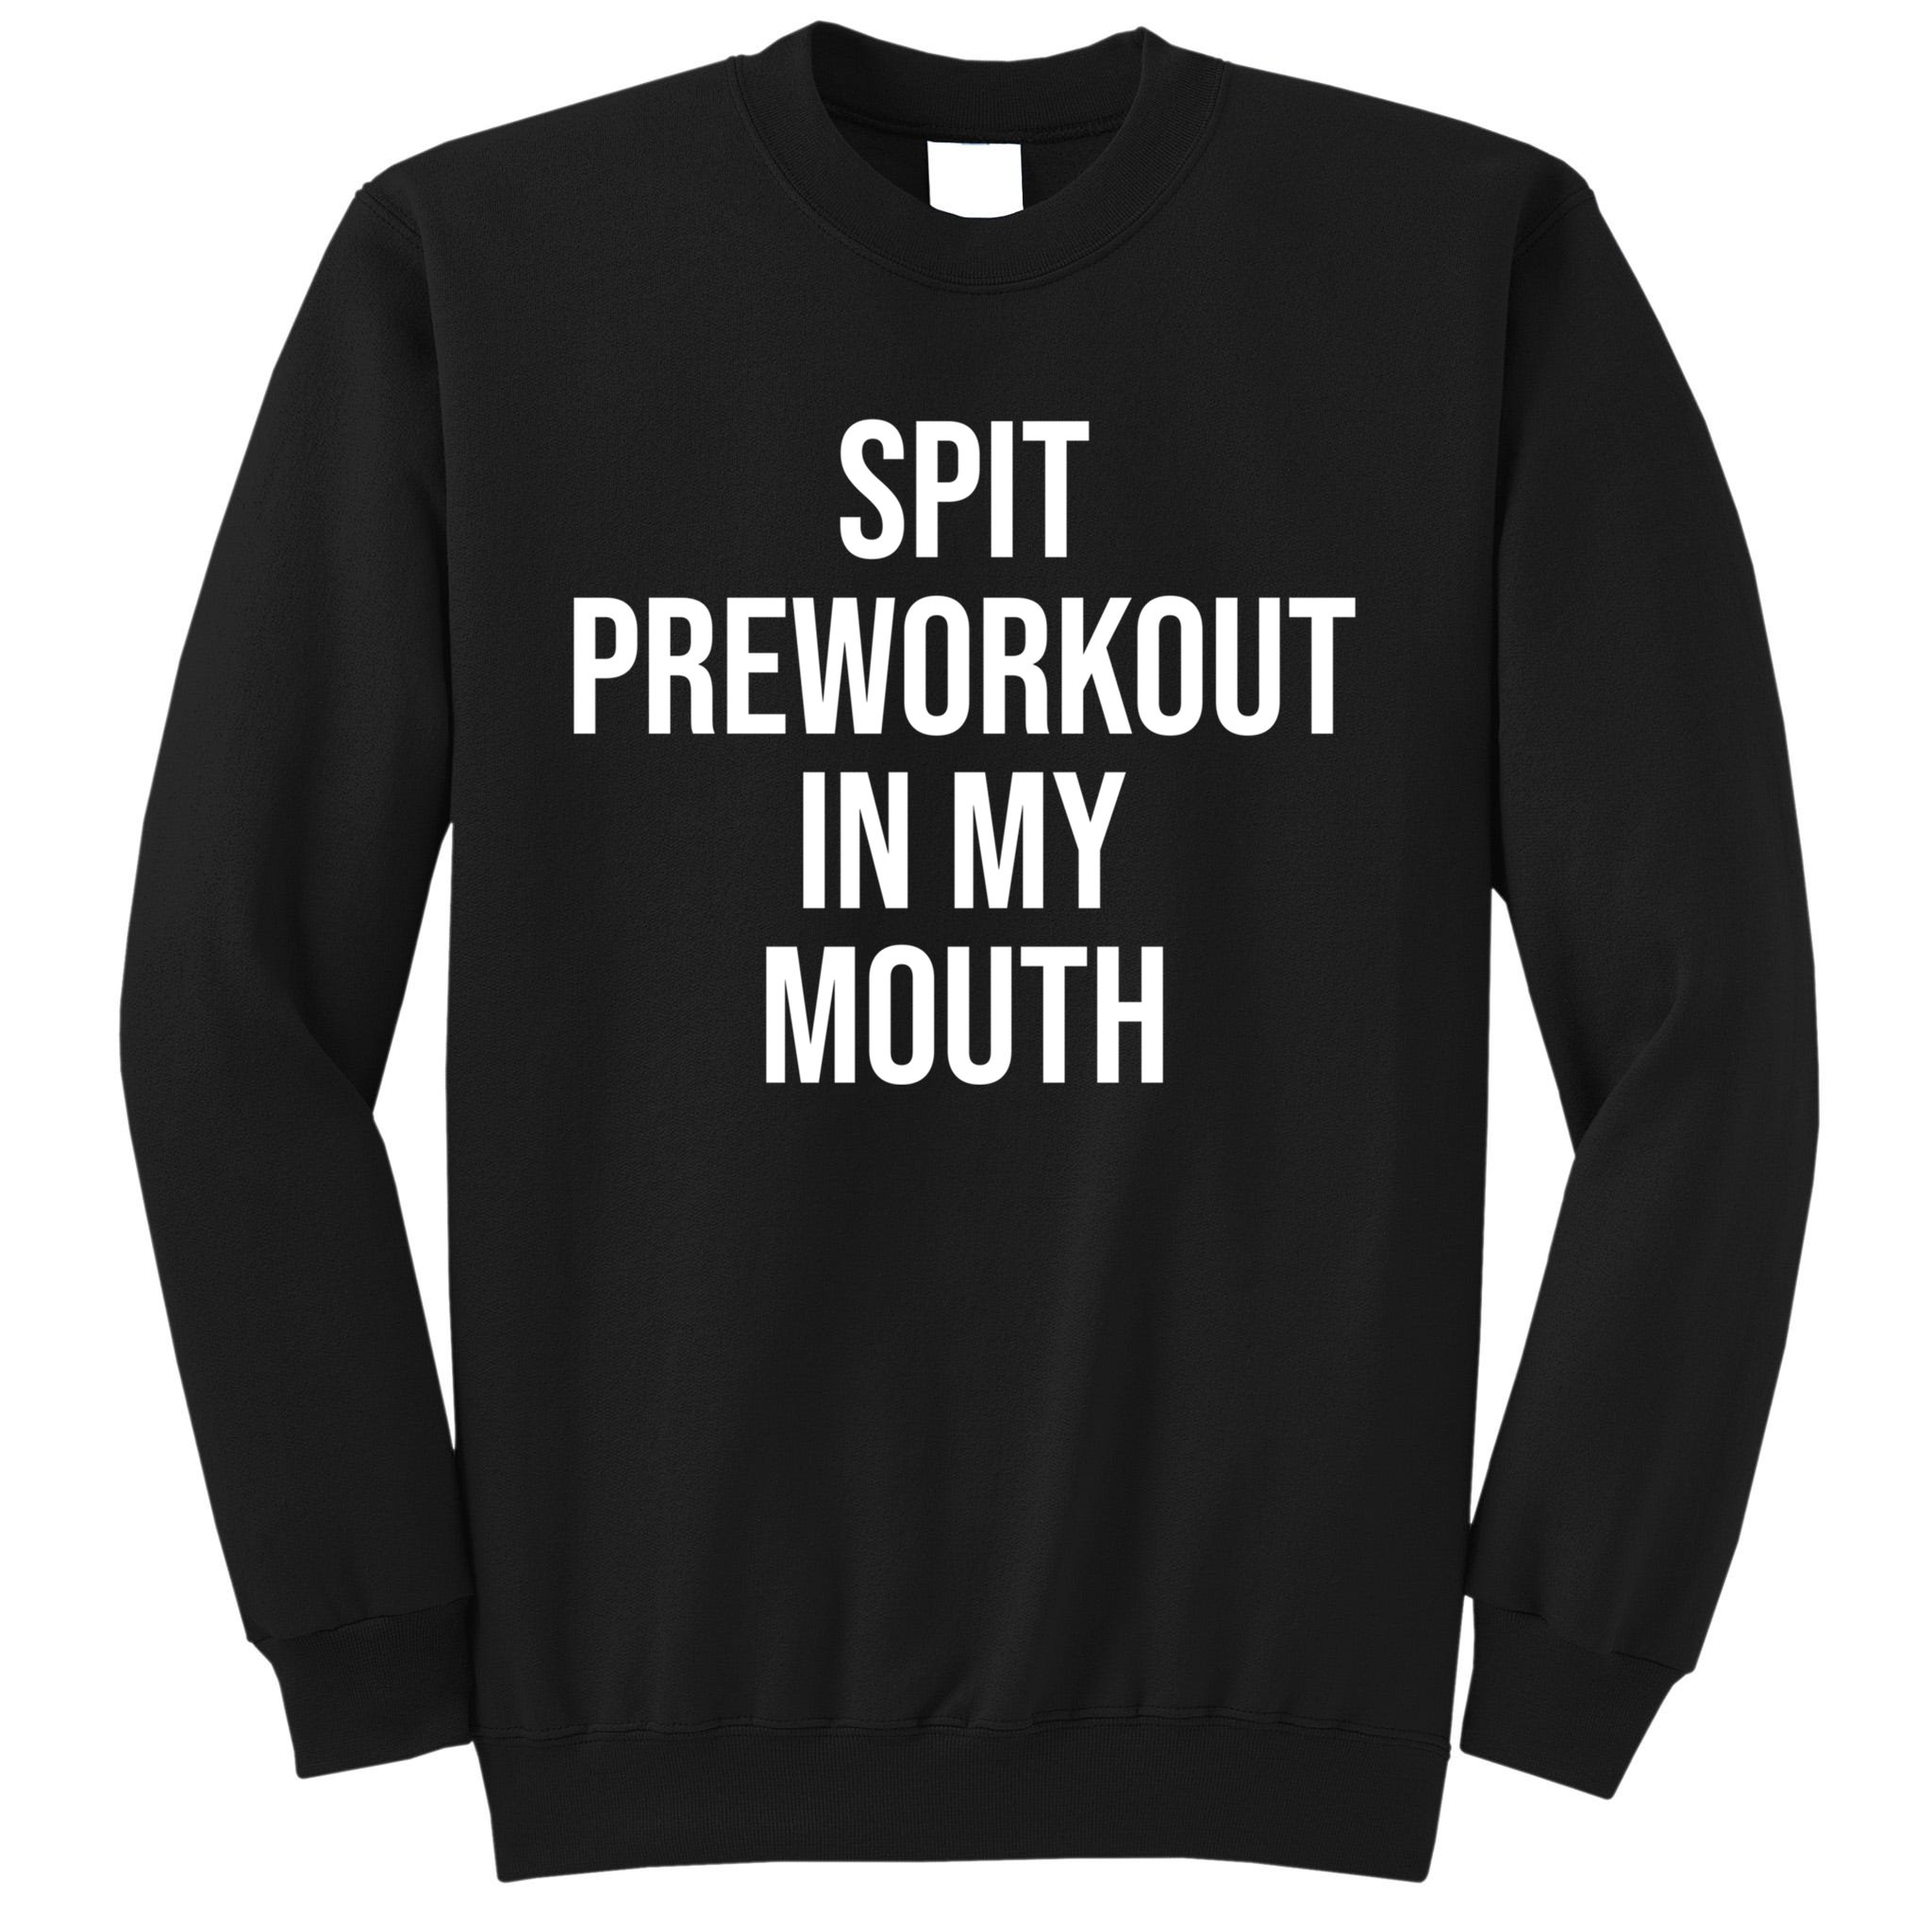 https://images3.teeshirtpalace.com/images/productImages/spw4722971-spit-pre-workout-in-my-mouth-spit-preworkout-in-my-mouth--black-as-garment.jpg